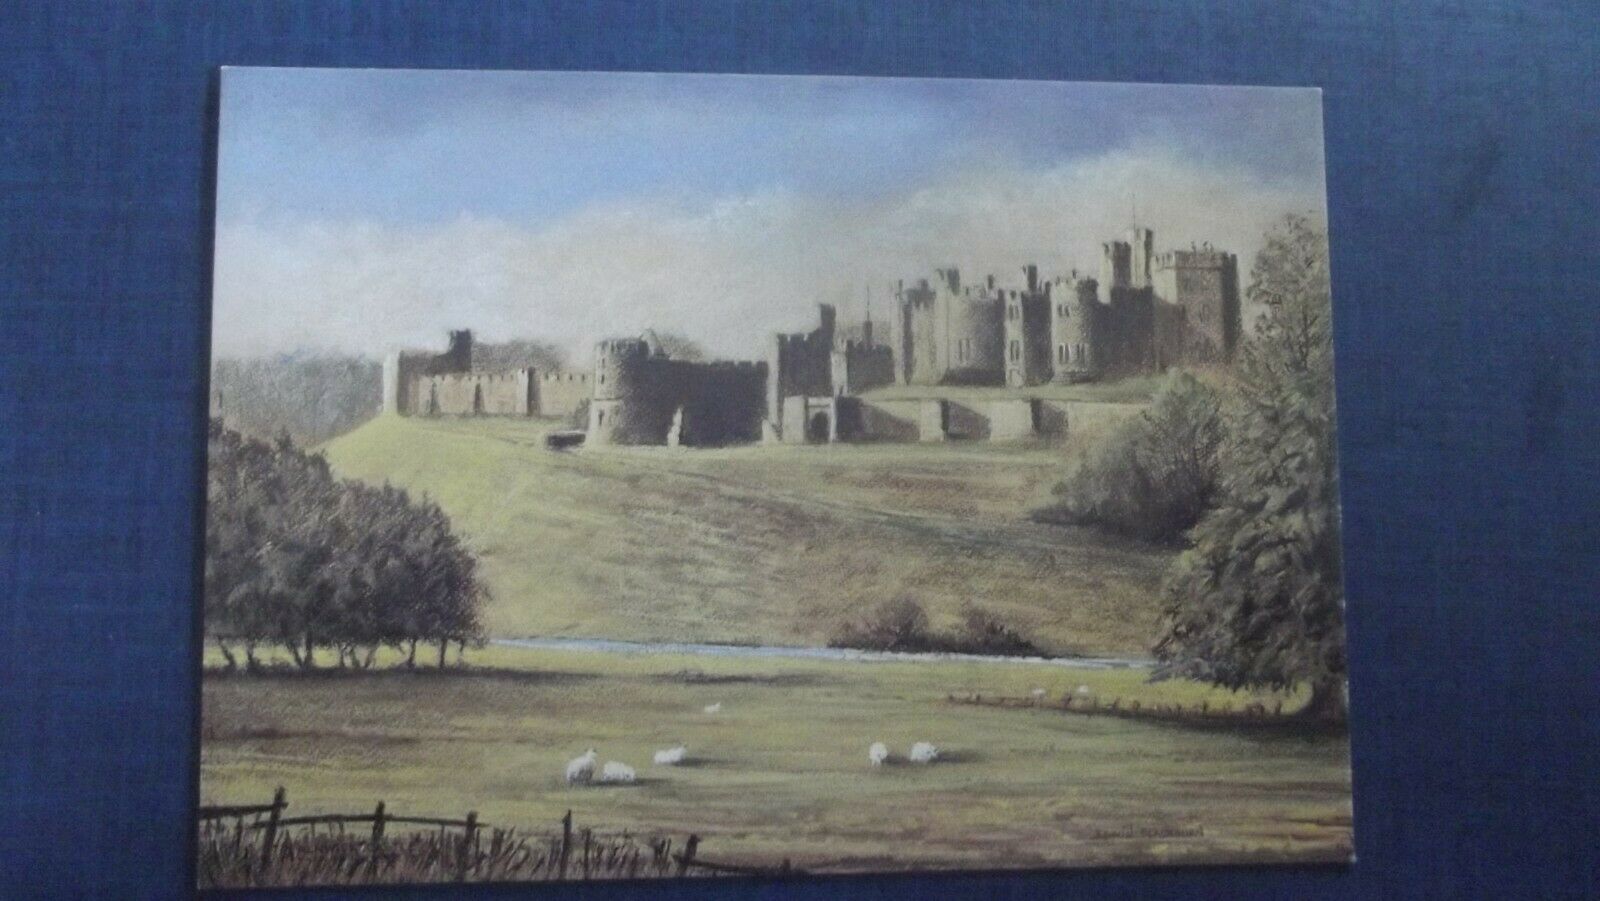 House Clearance - Alnwick Castle Edwin Blackburn Collection c 1980 Unposted